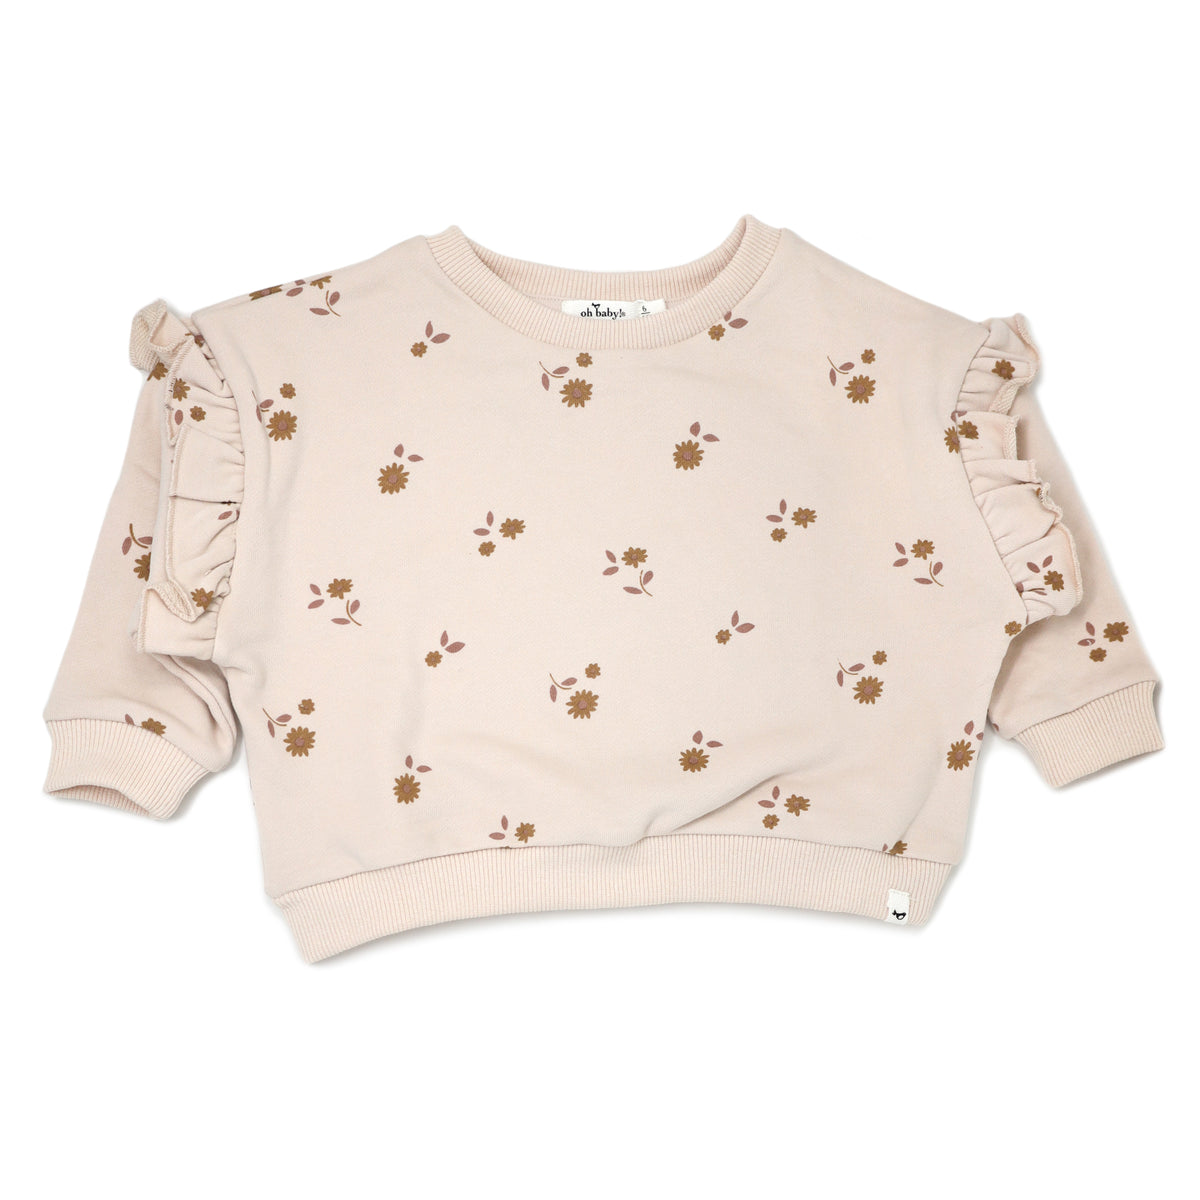 oh baby! Millie Slouch Sweatshirt with Mini Daisies with Leaves Print - Shell